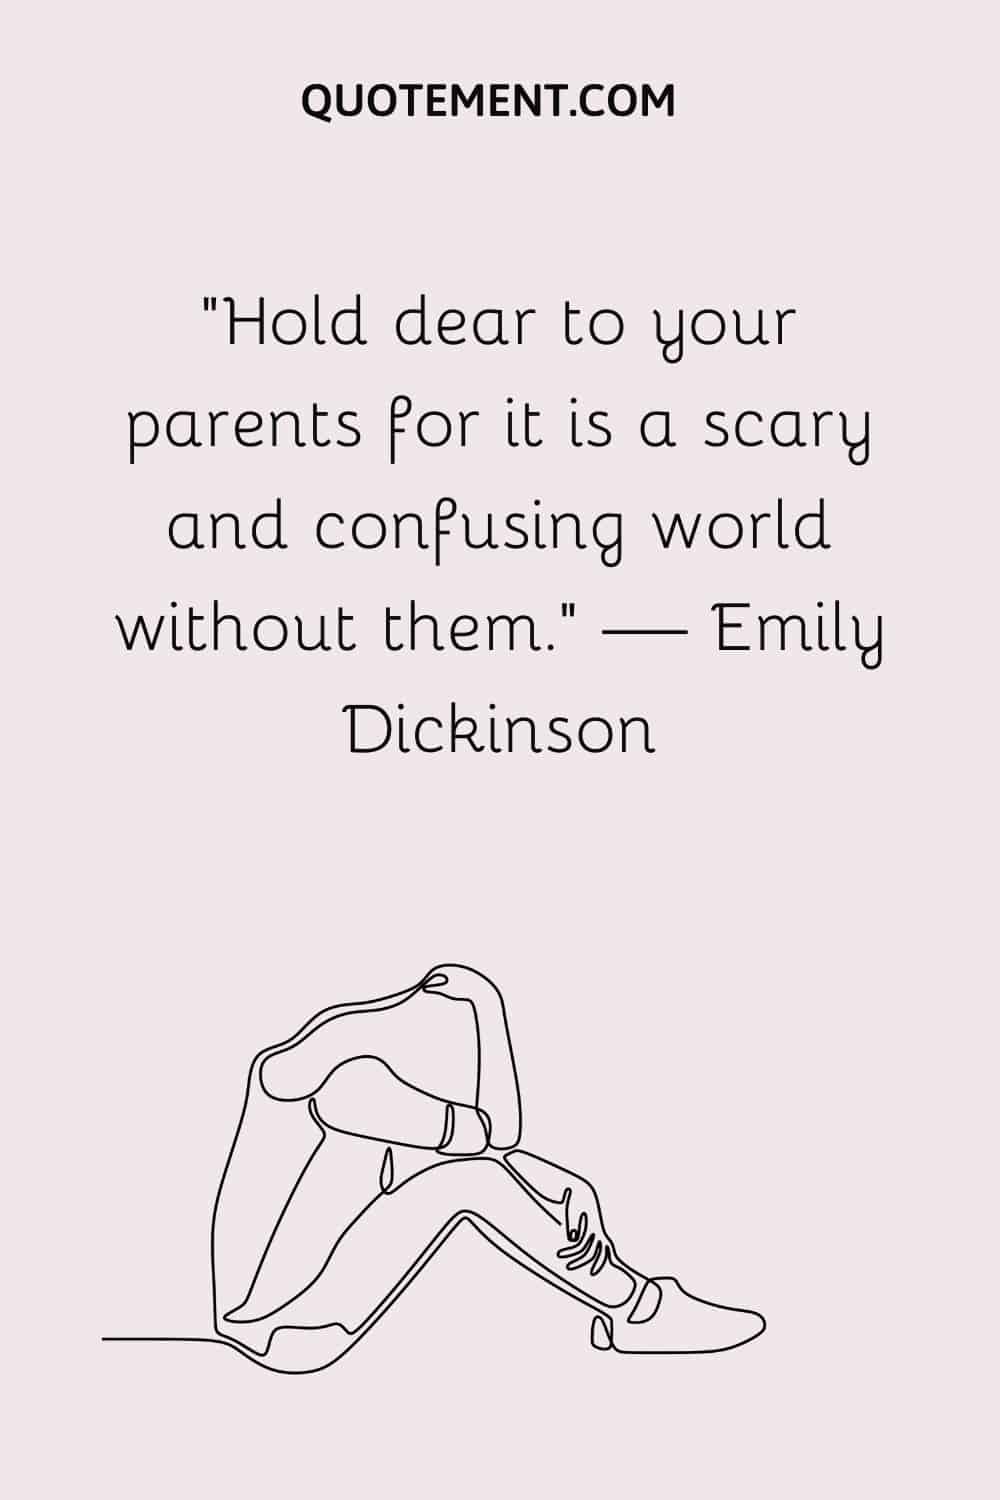 Hold dear to your parents for it is a scary and confusing world without them